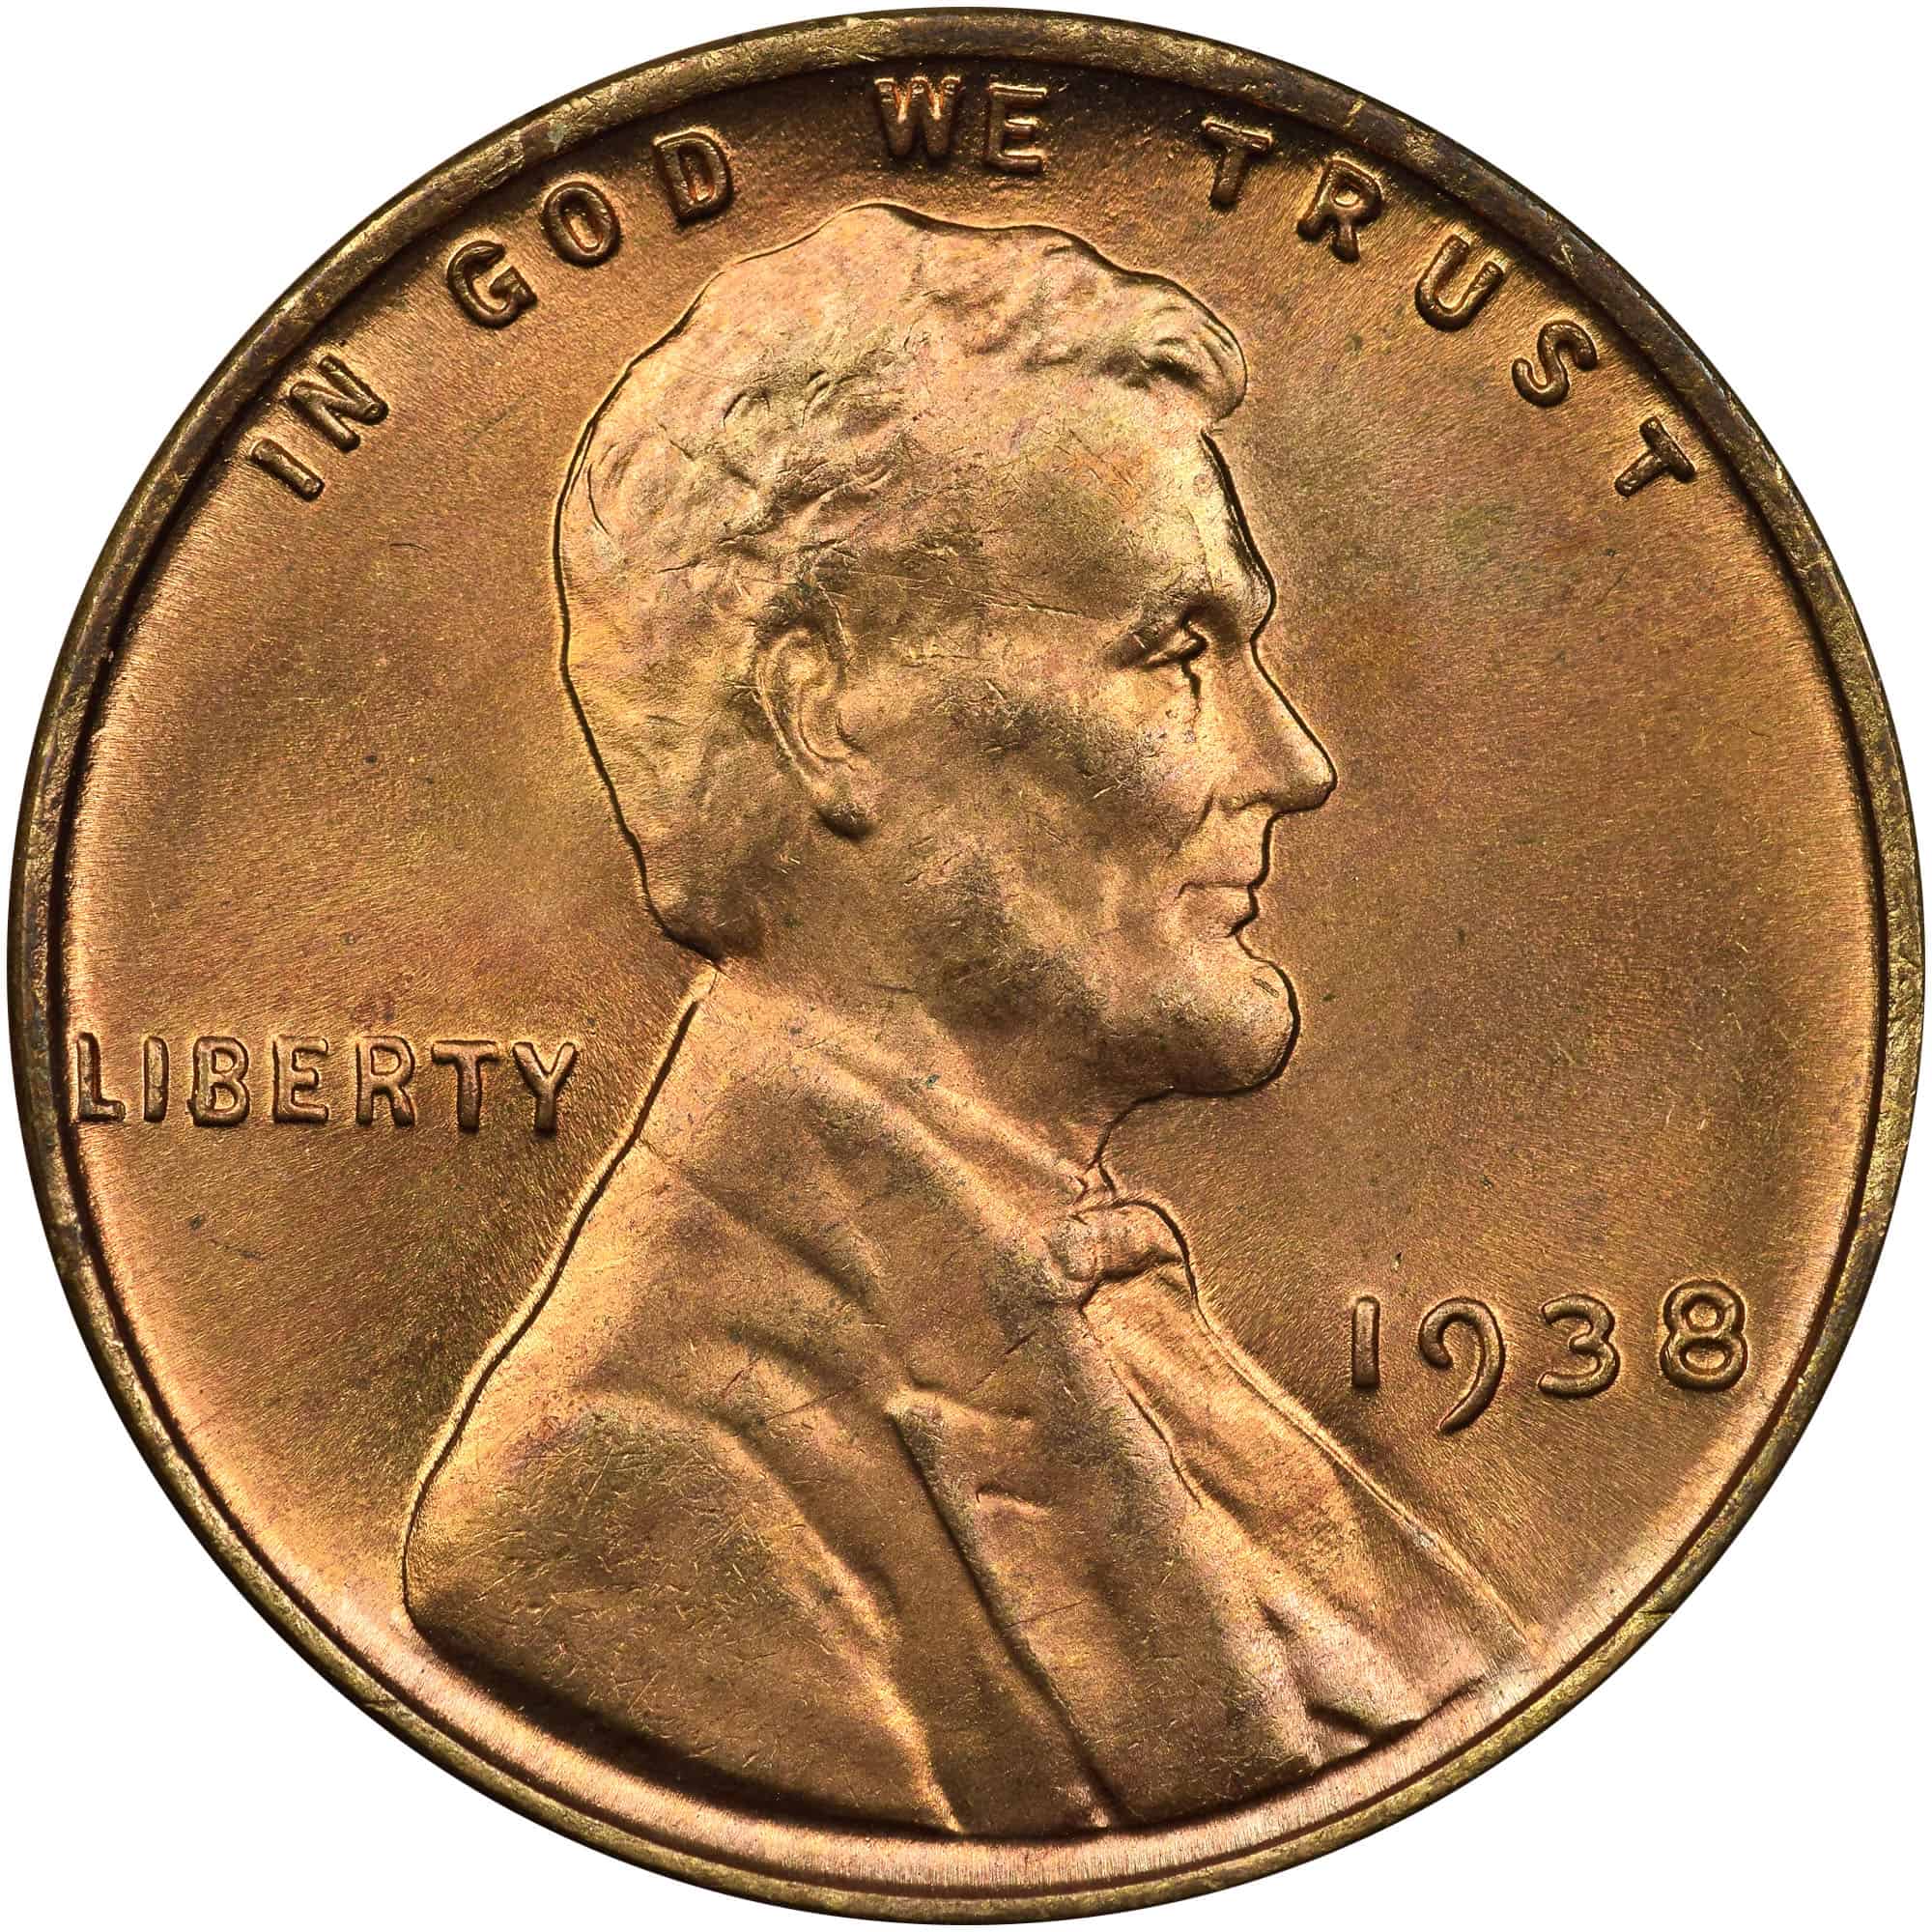 The obverse of the 1938 Lincoln cent